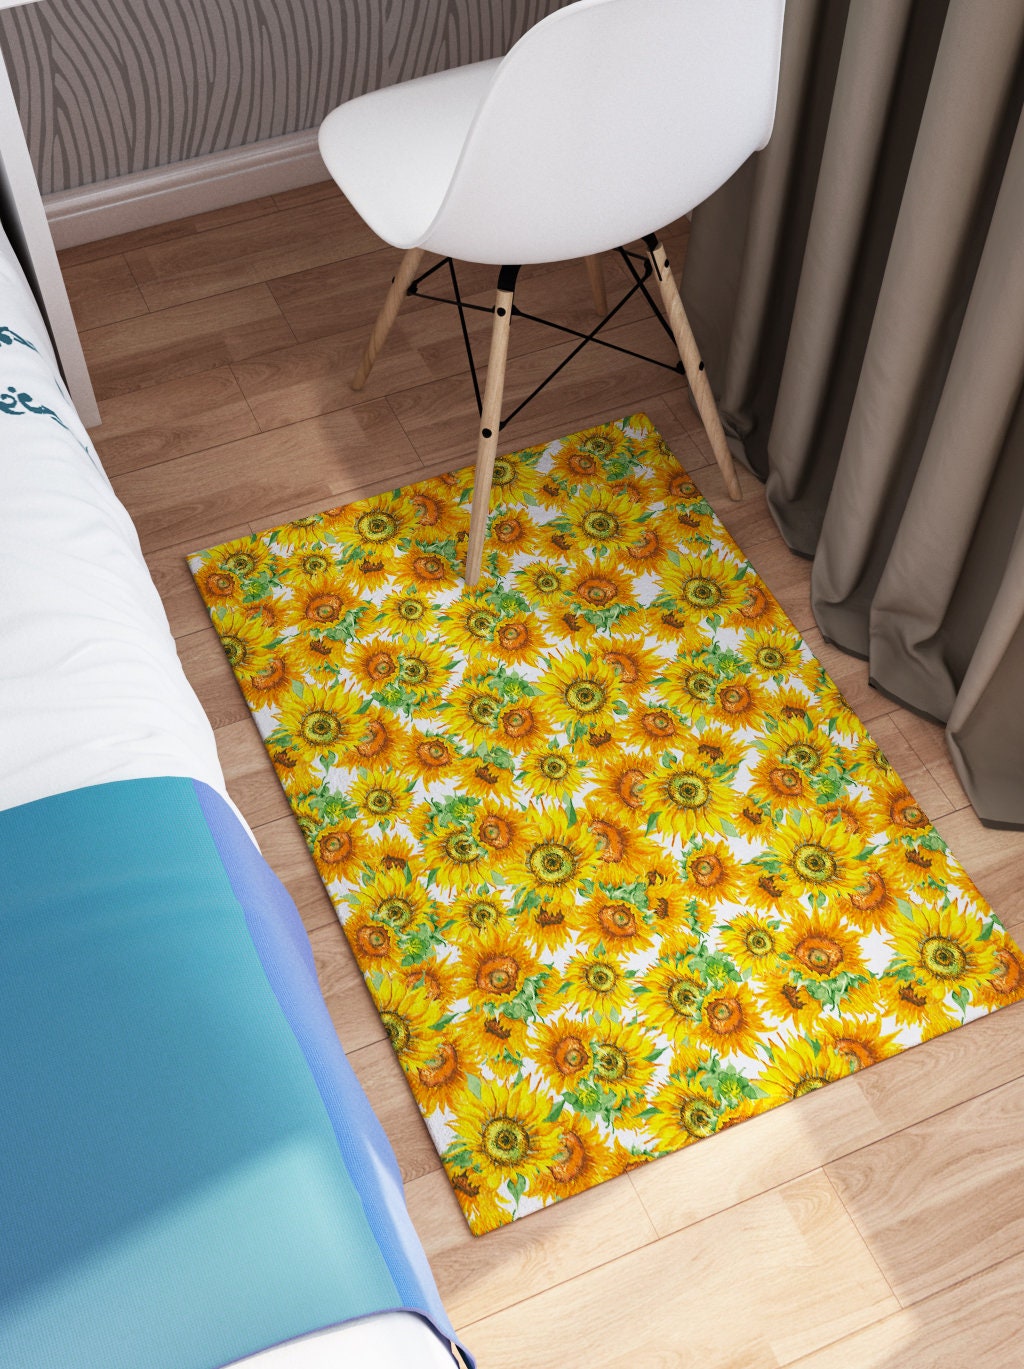 Sunflowers Rug yellow colorful floral rugs 2x3 3x5 4x6 5x7 9x12 large floor mat sunflower